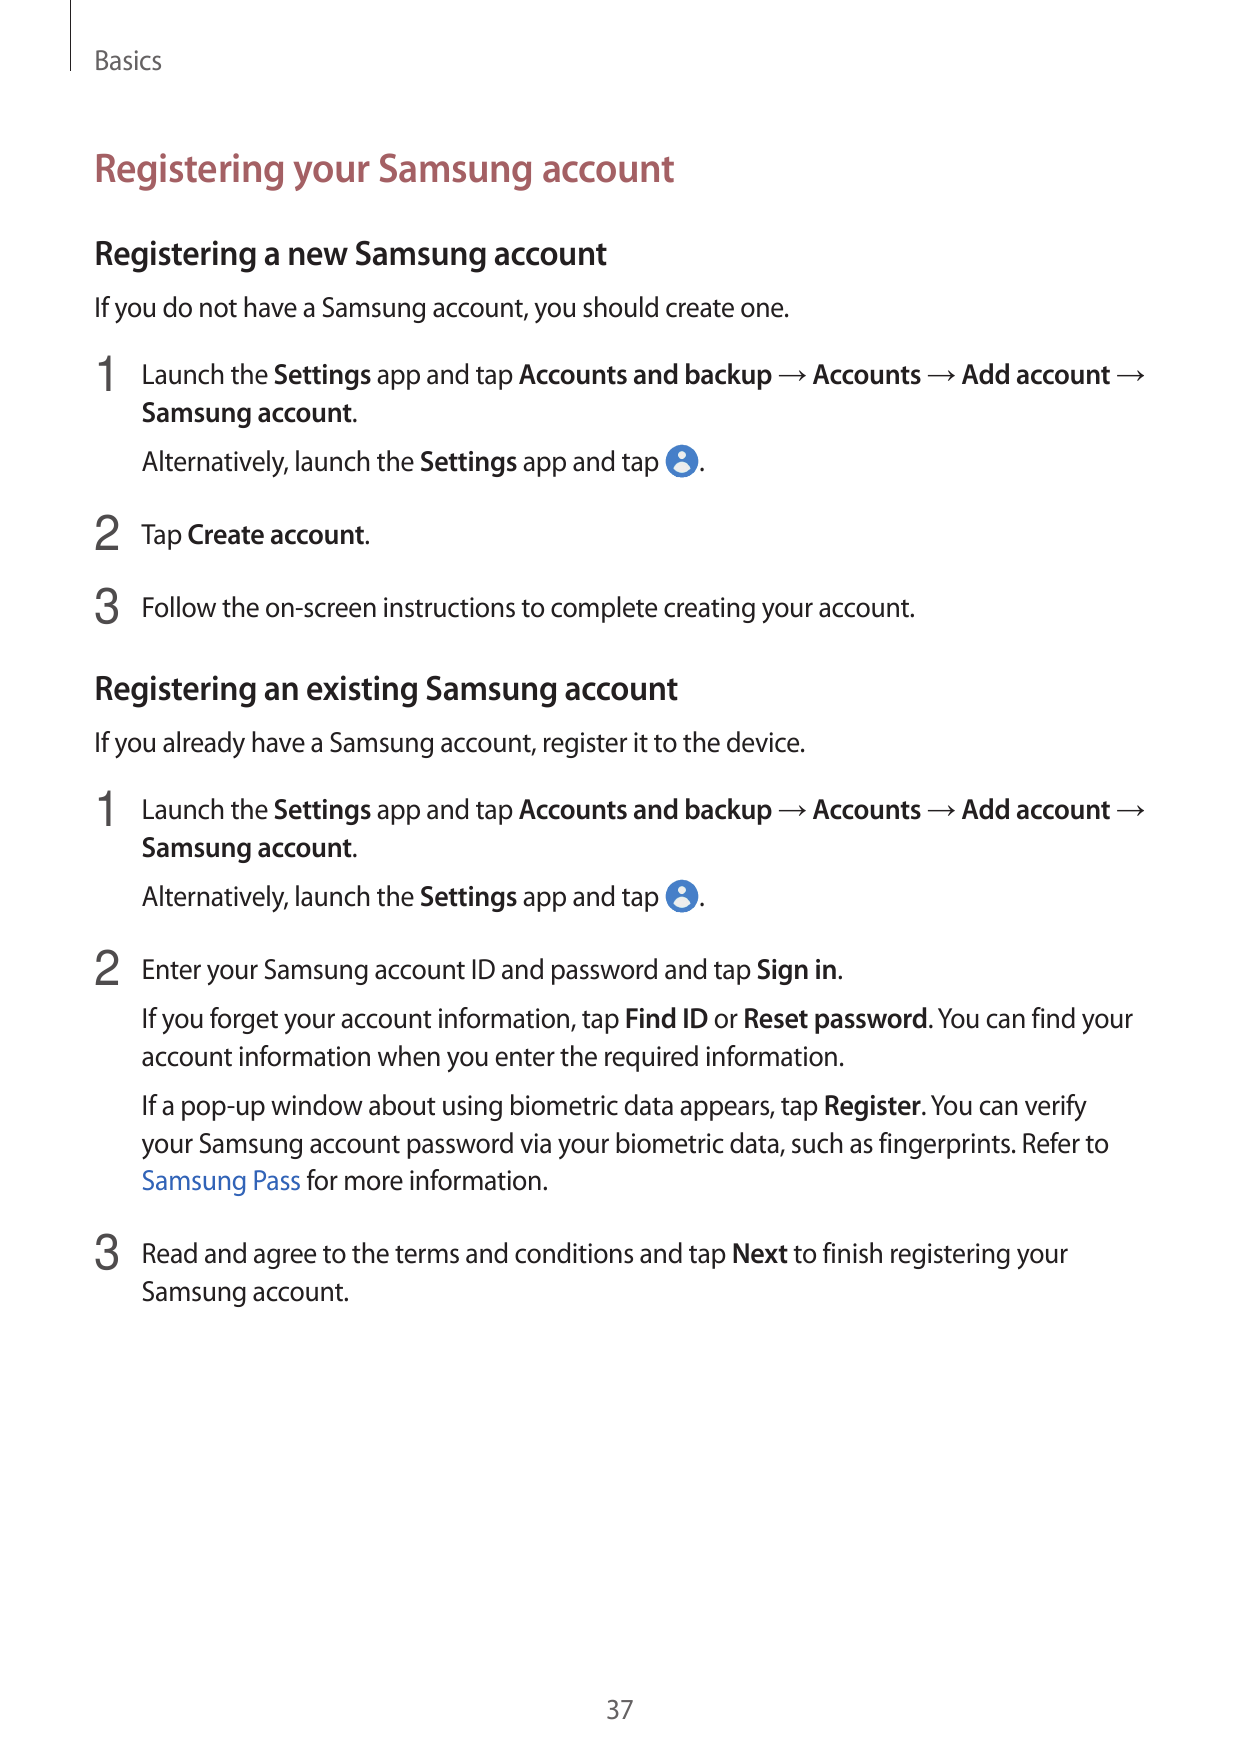 BasicsRegistering your Samsung accountRegistering a new Samsung accountIf you do not have a Samsung account, you should create o